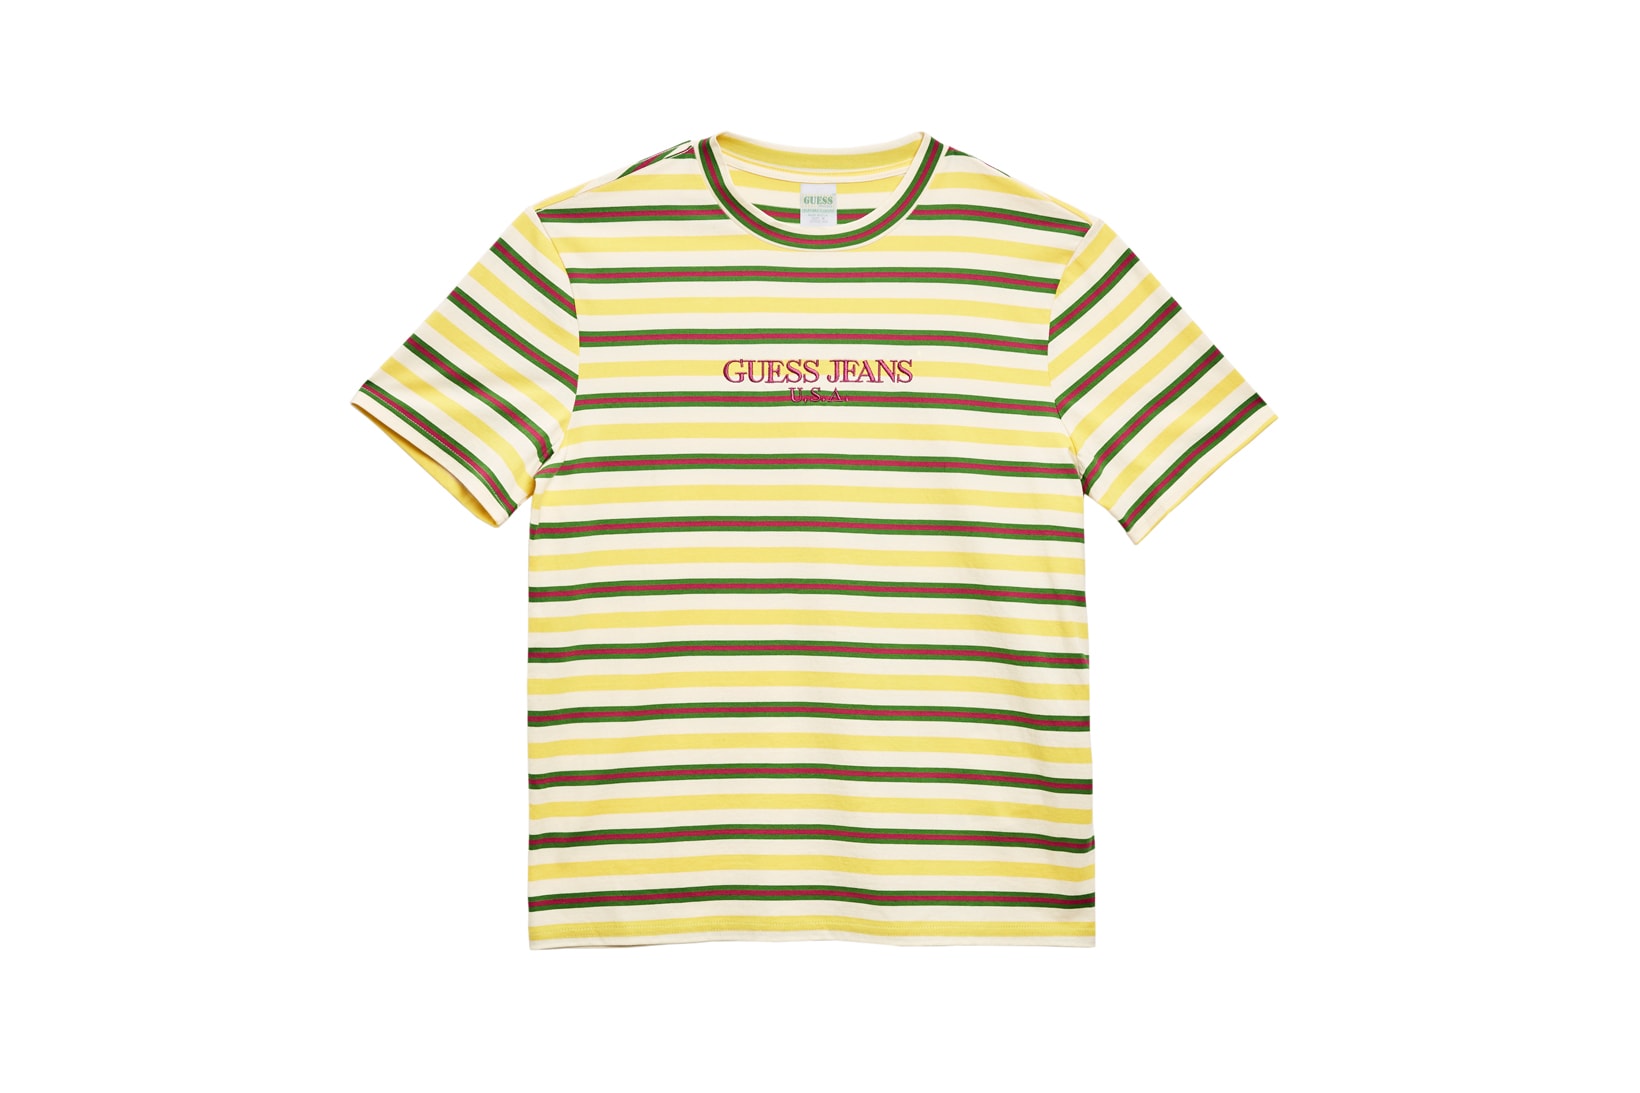 GUESS Jeans U.S.A. Farmers Market Capsule Collection Striped T-Shirt Yellow